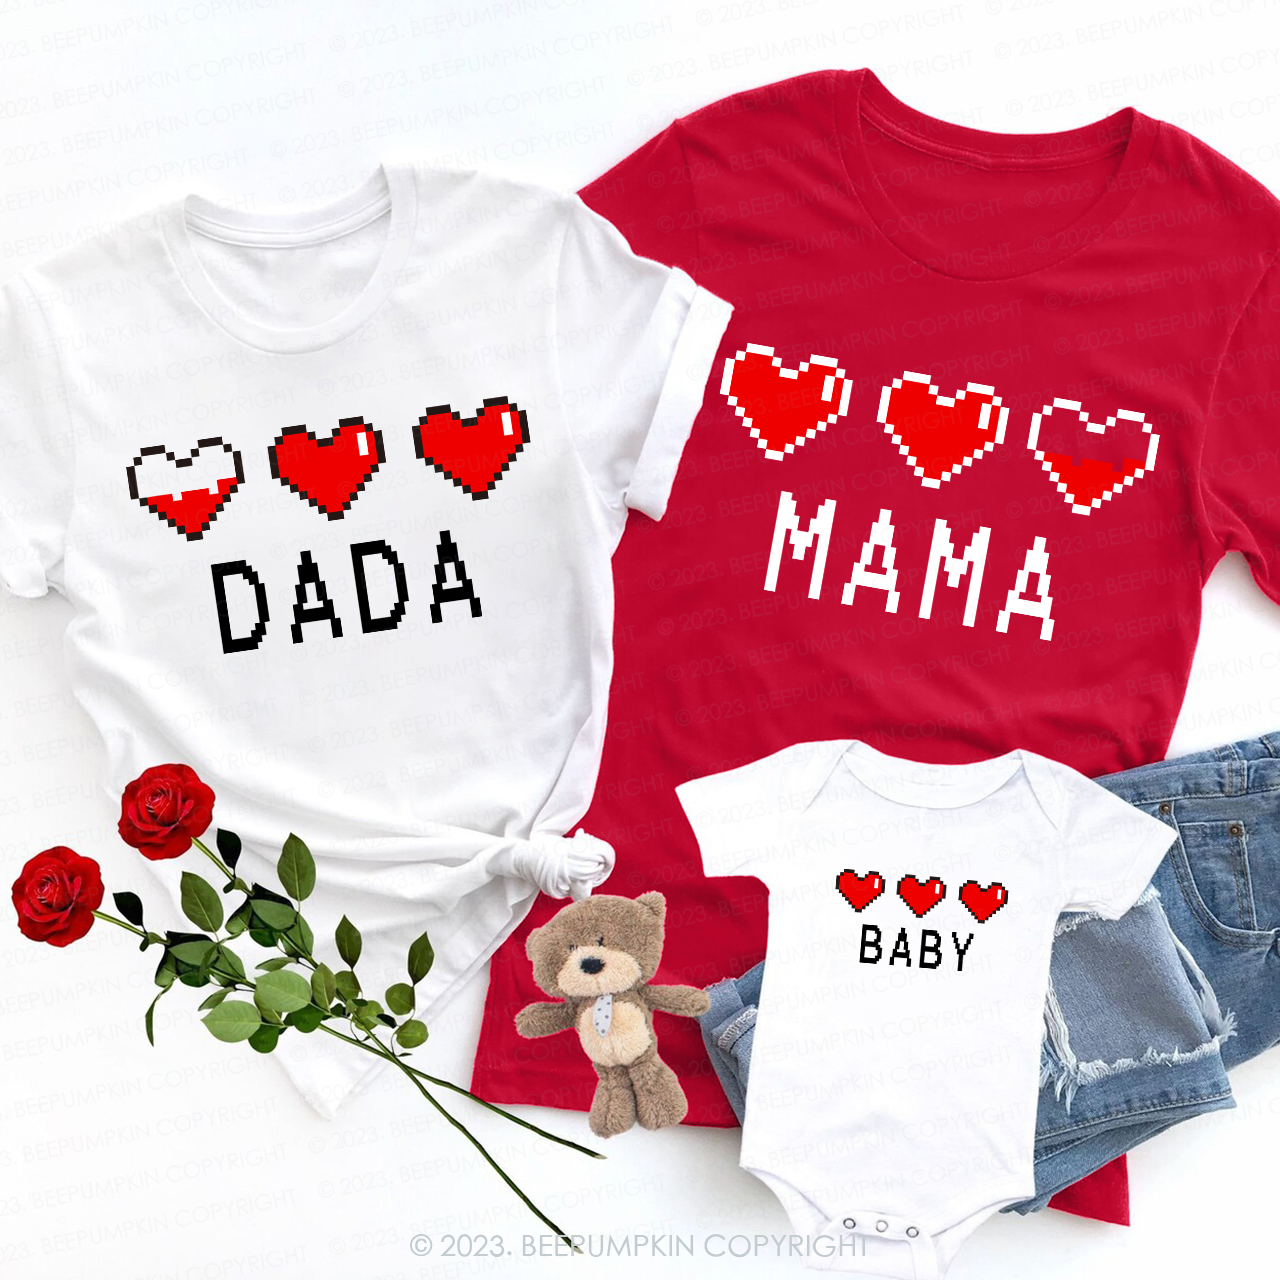 Personalized Pixel Heart Gift Valentine's Shirts For Family